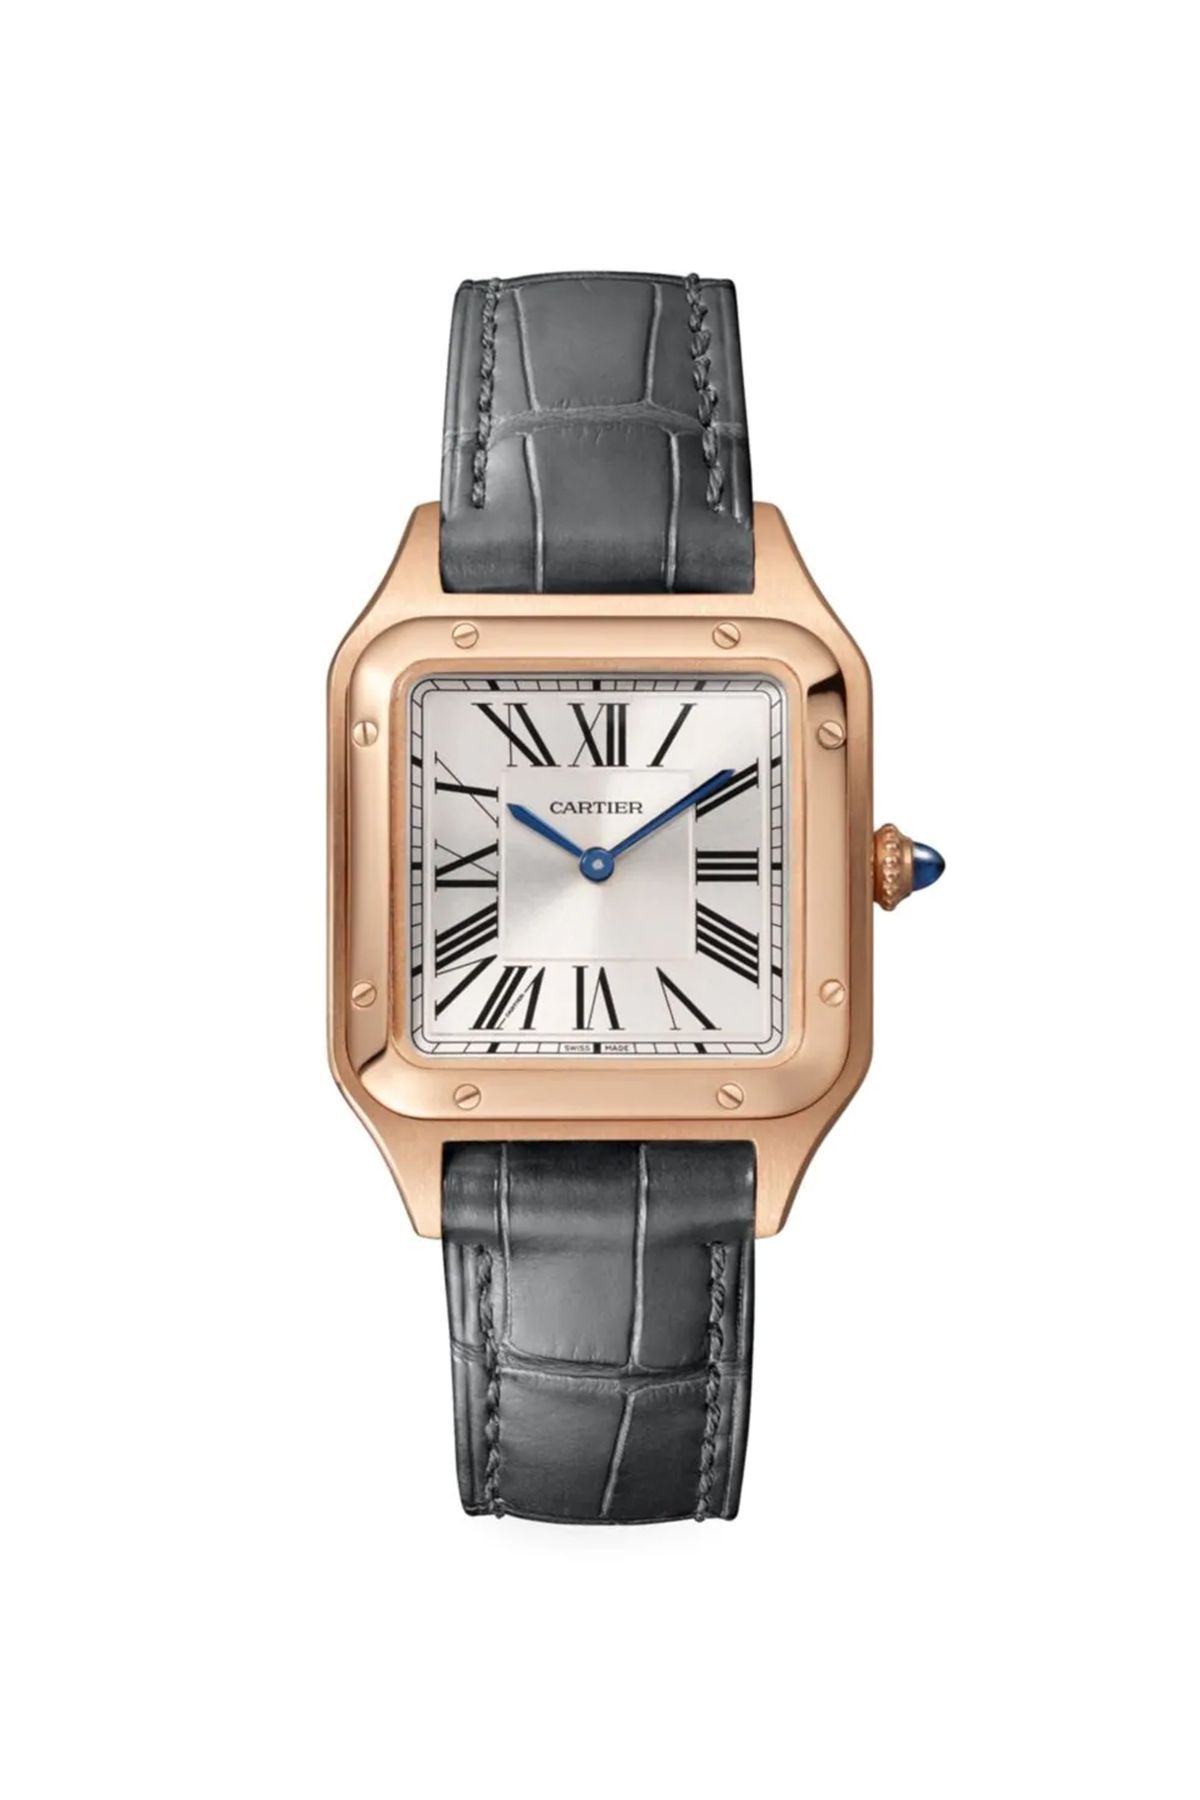 latest cartier watches for ladies